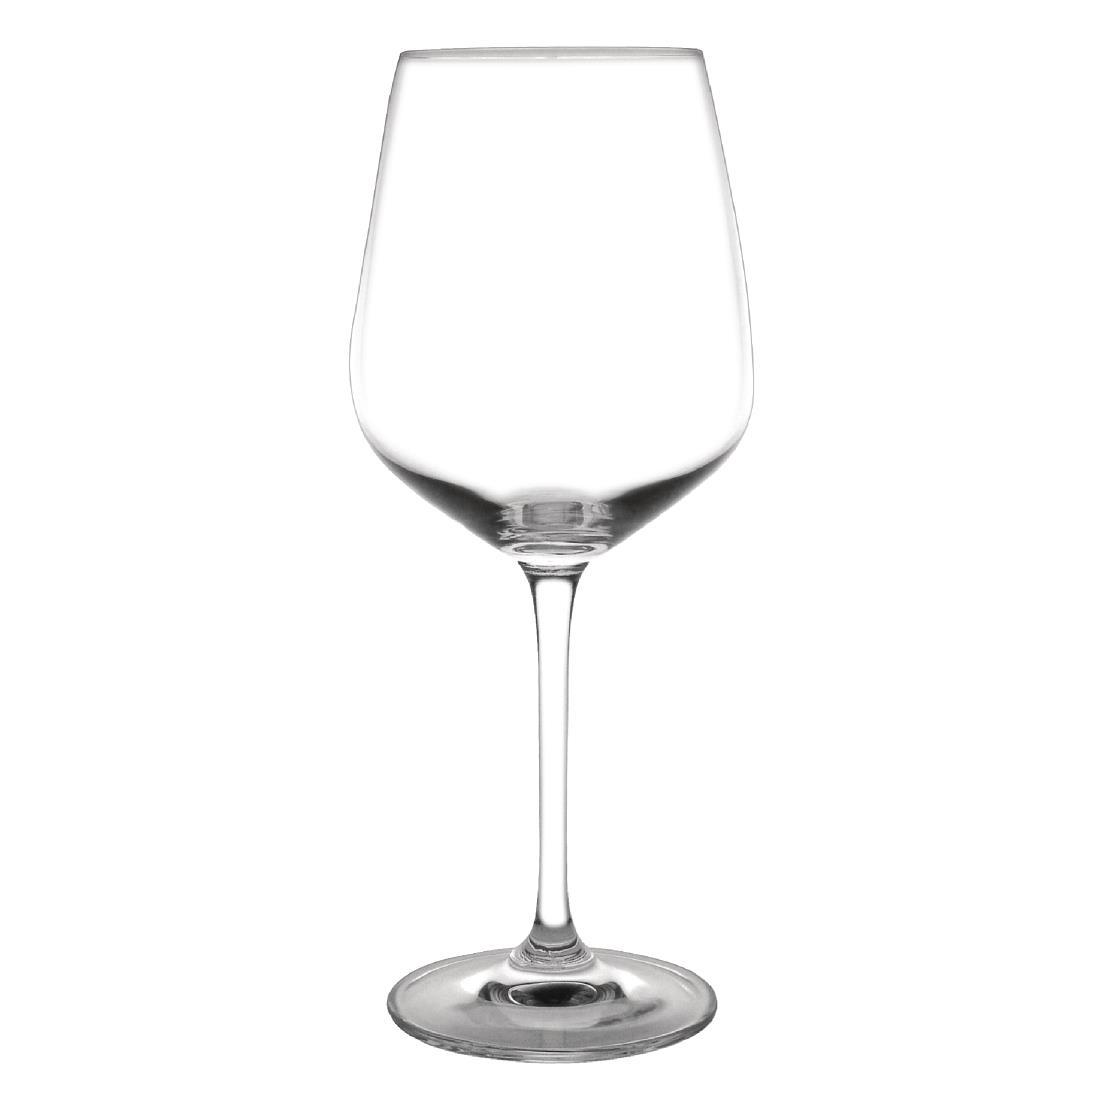 Olympia Chime Crystal Wine Glasses 495ml (Pack of 6) - GF734  - 1